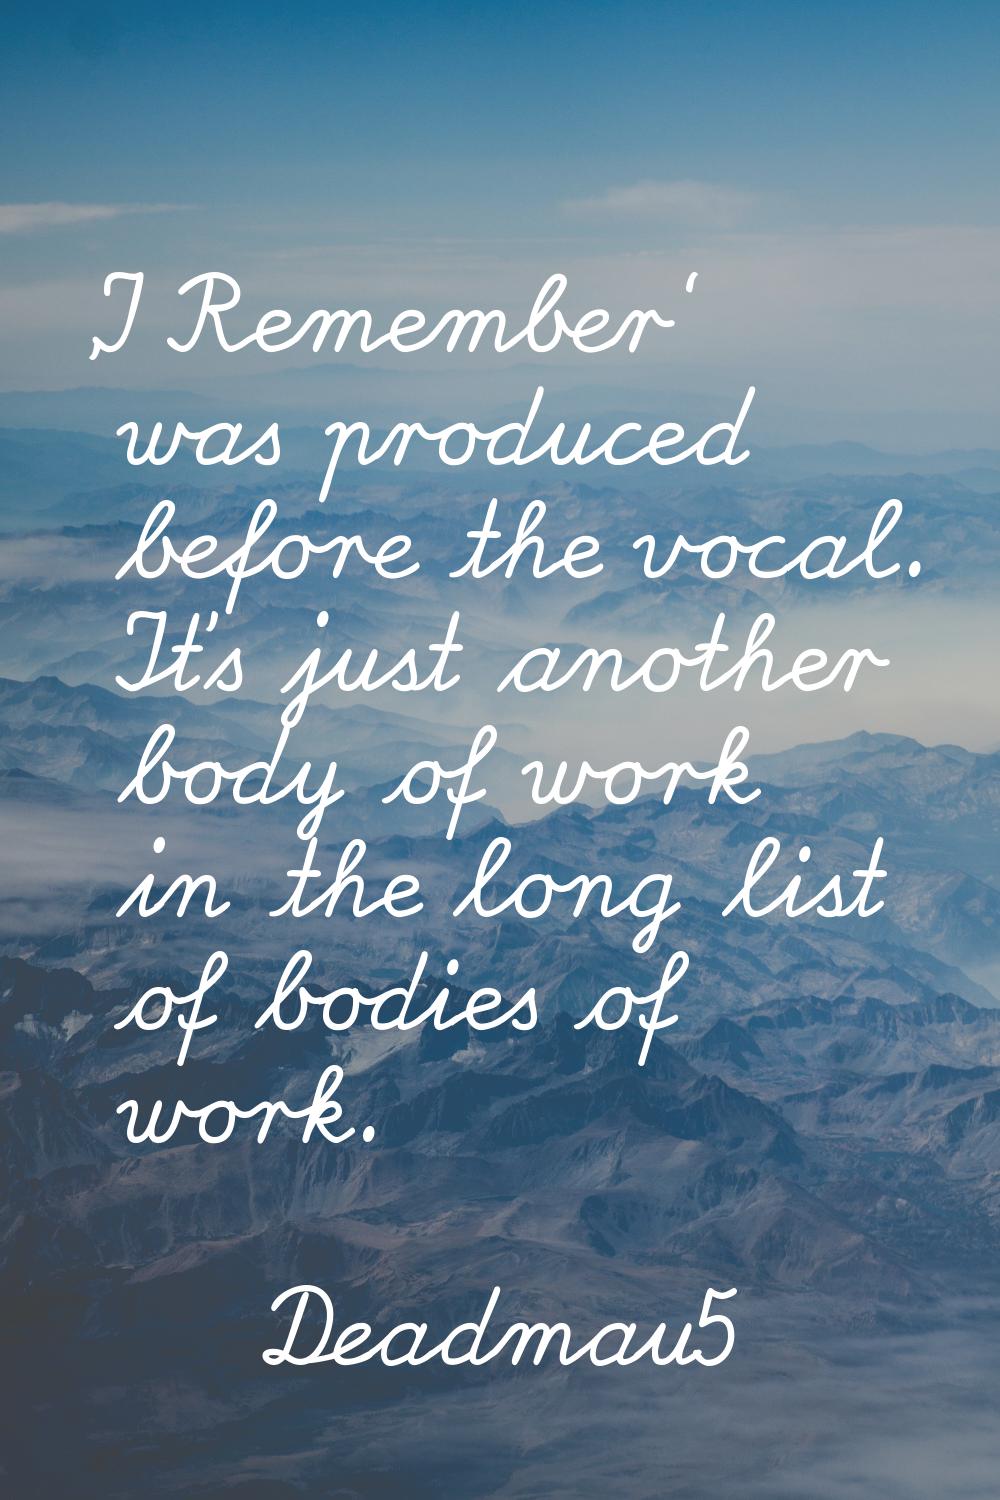 'I Remember' was produced before the vocal. It's just another body of work in the long list of bodi